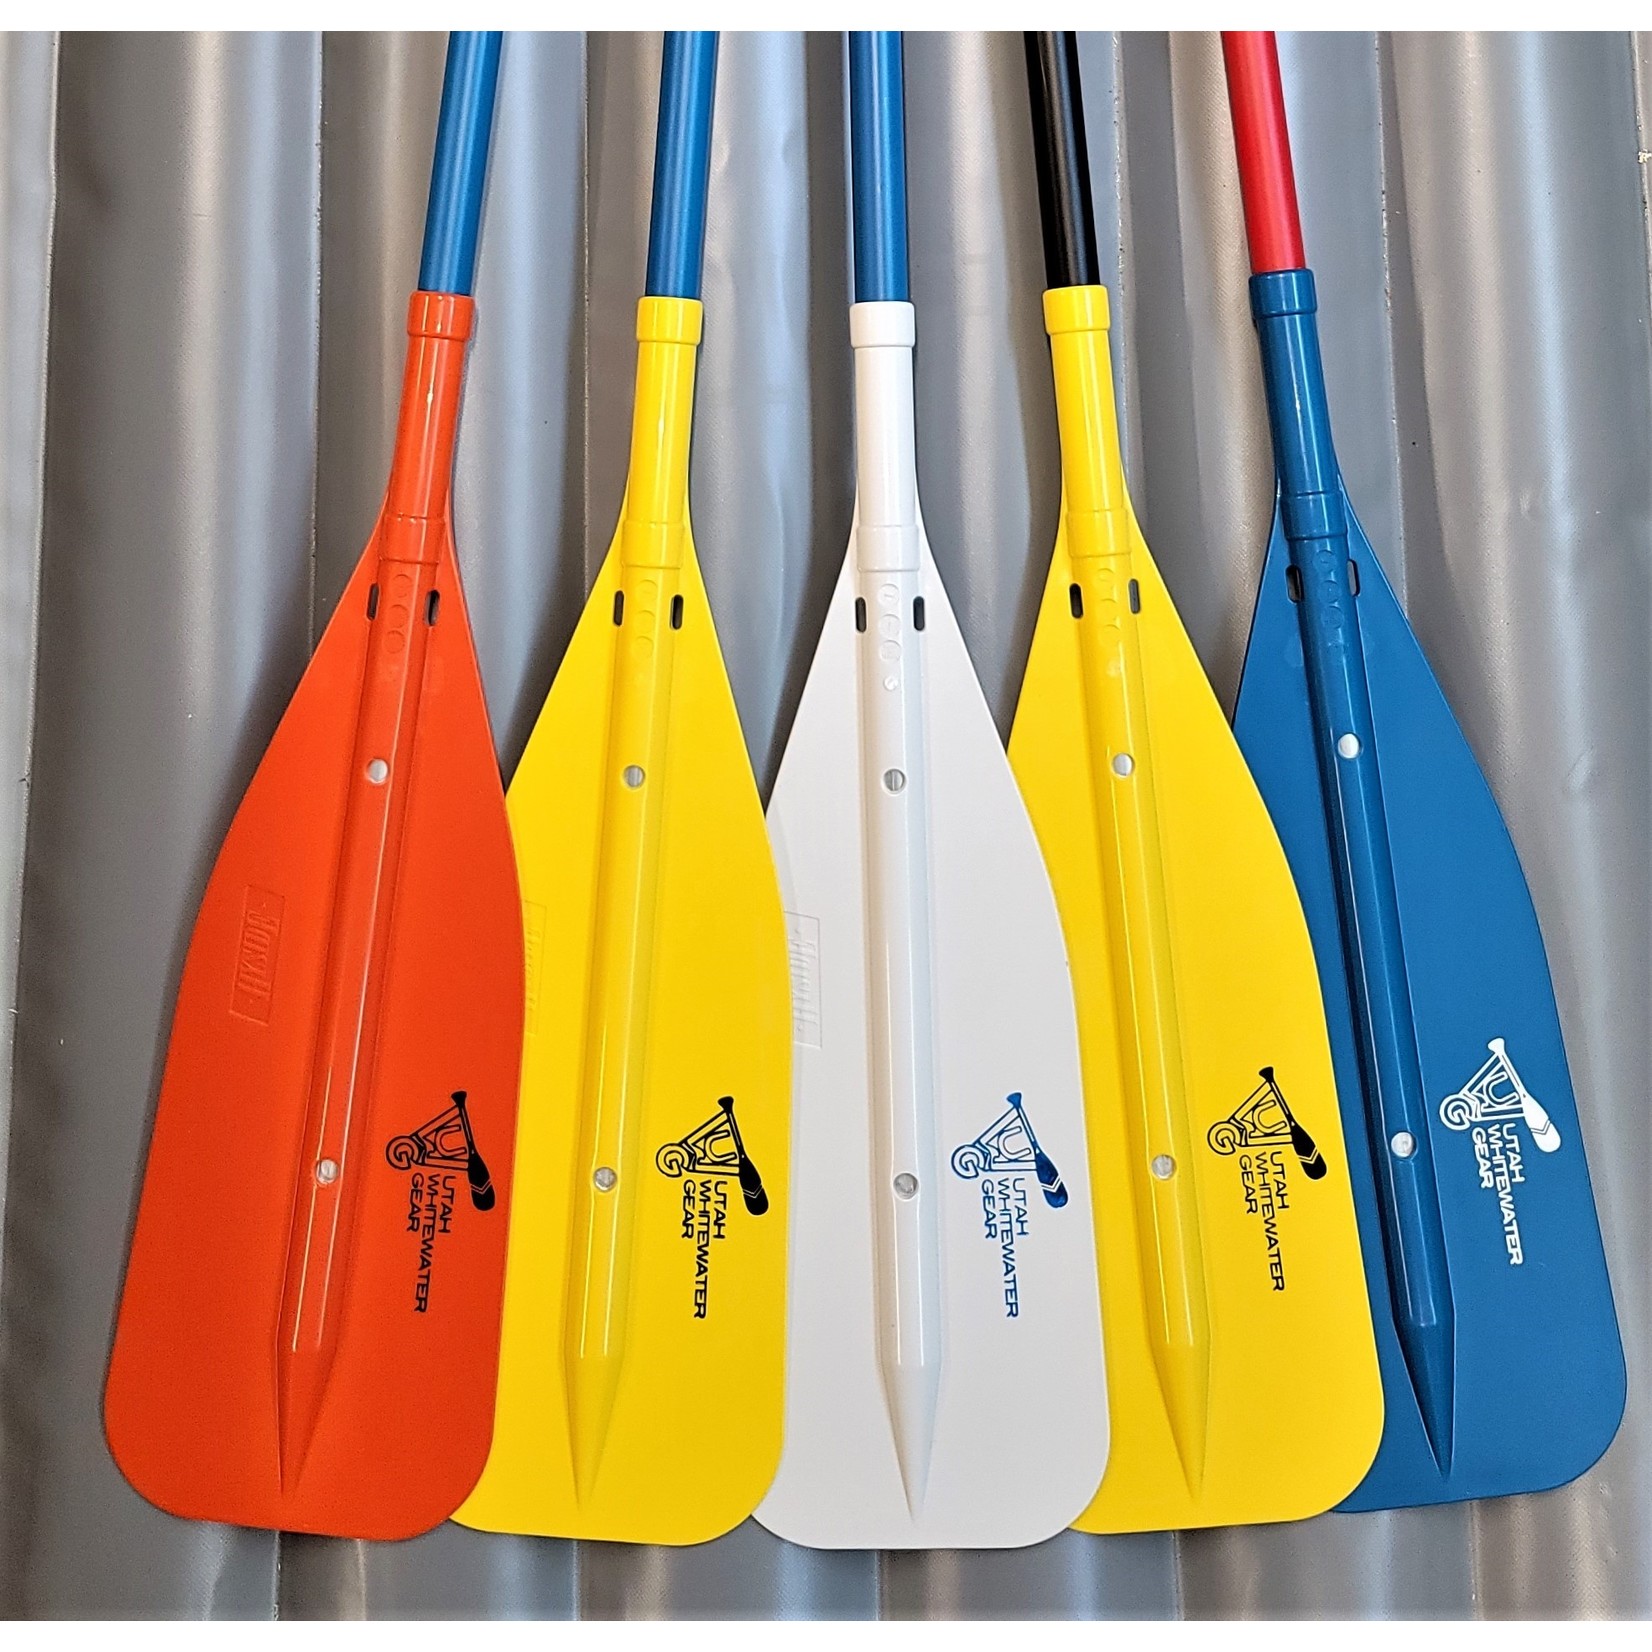 Hyside Inflatables UWG/HYSIDE Crew Paddle